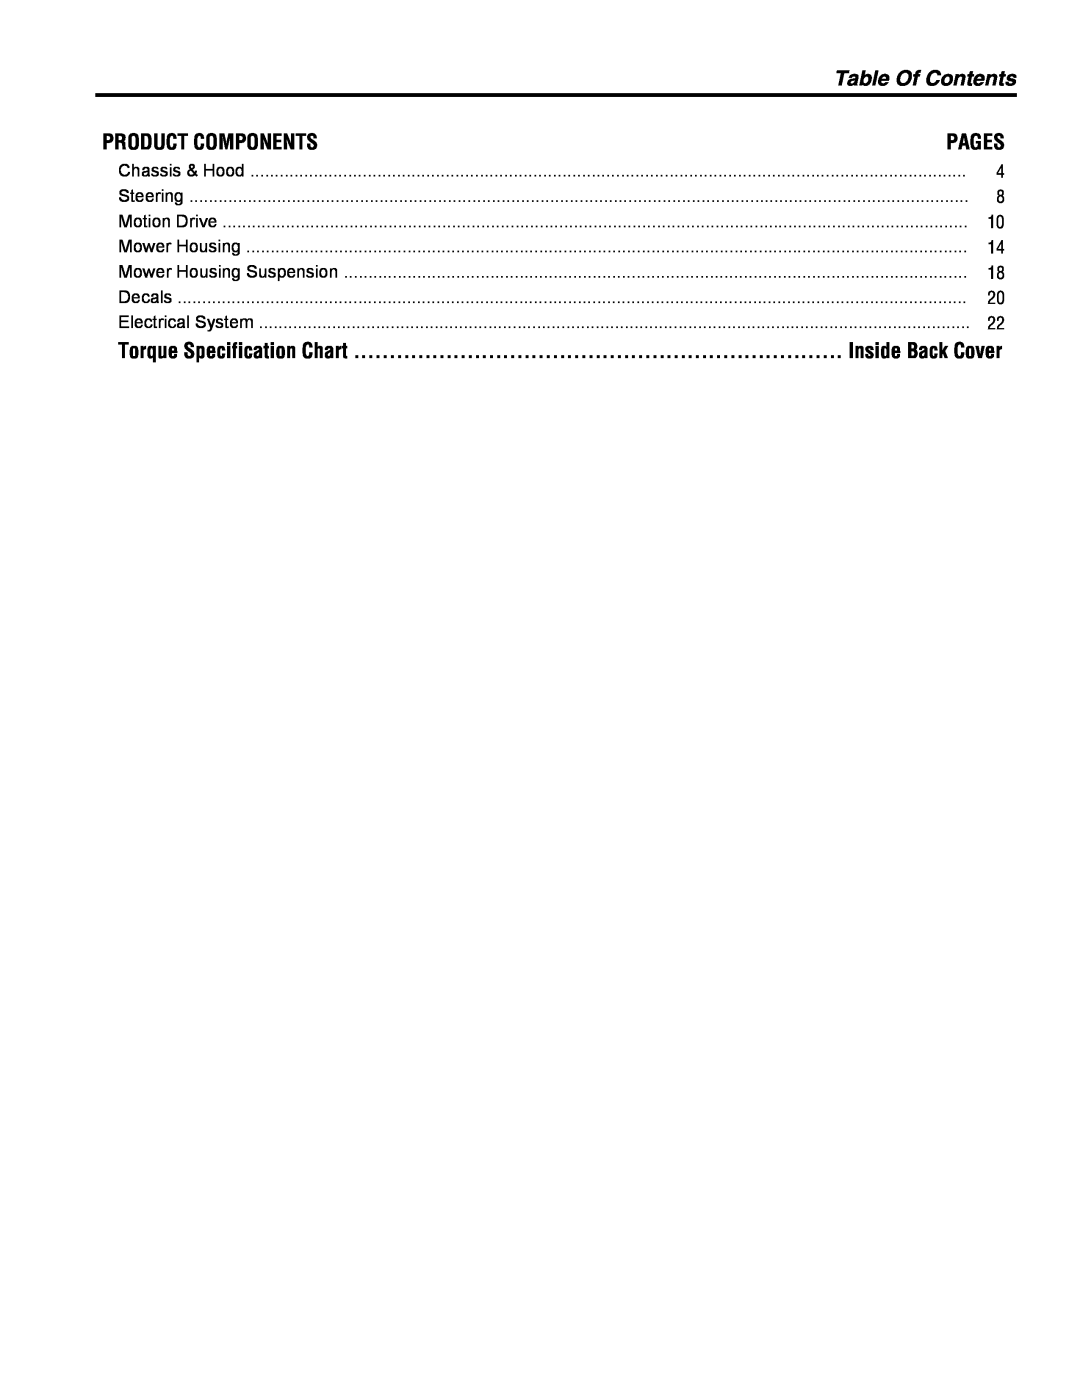 Hayter Mowers 10/30 manual Table Of Contents, Product Components, Pages, Torque Specification Chart, Inside Back Cover 